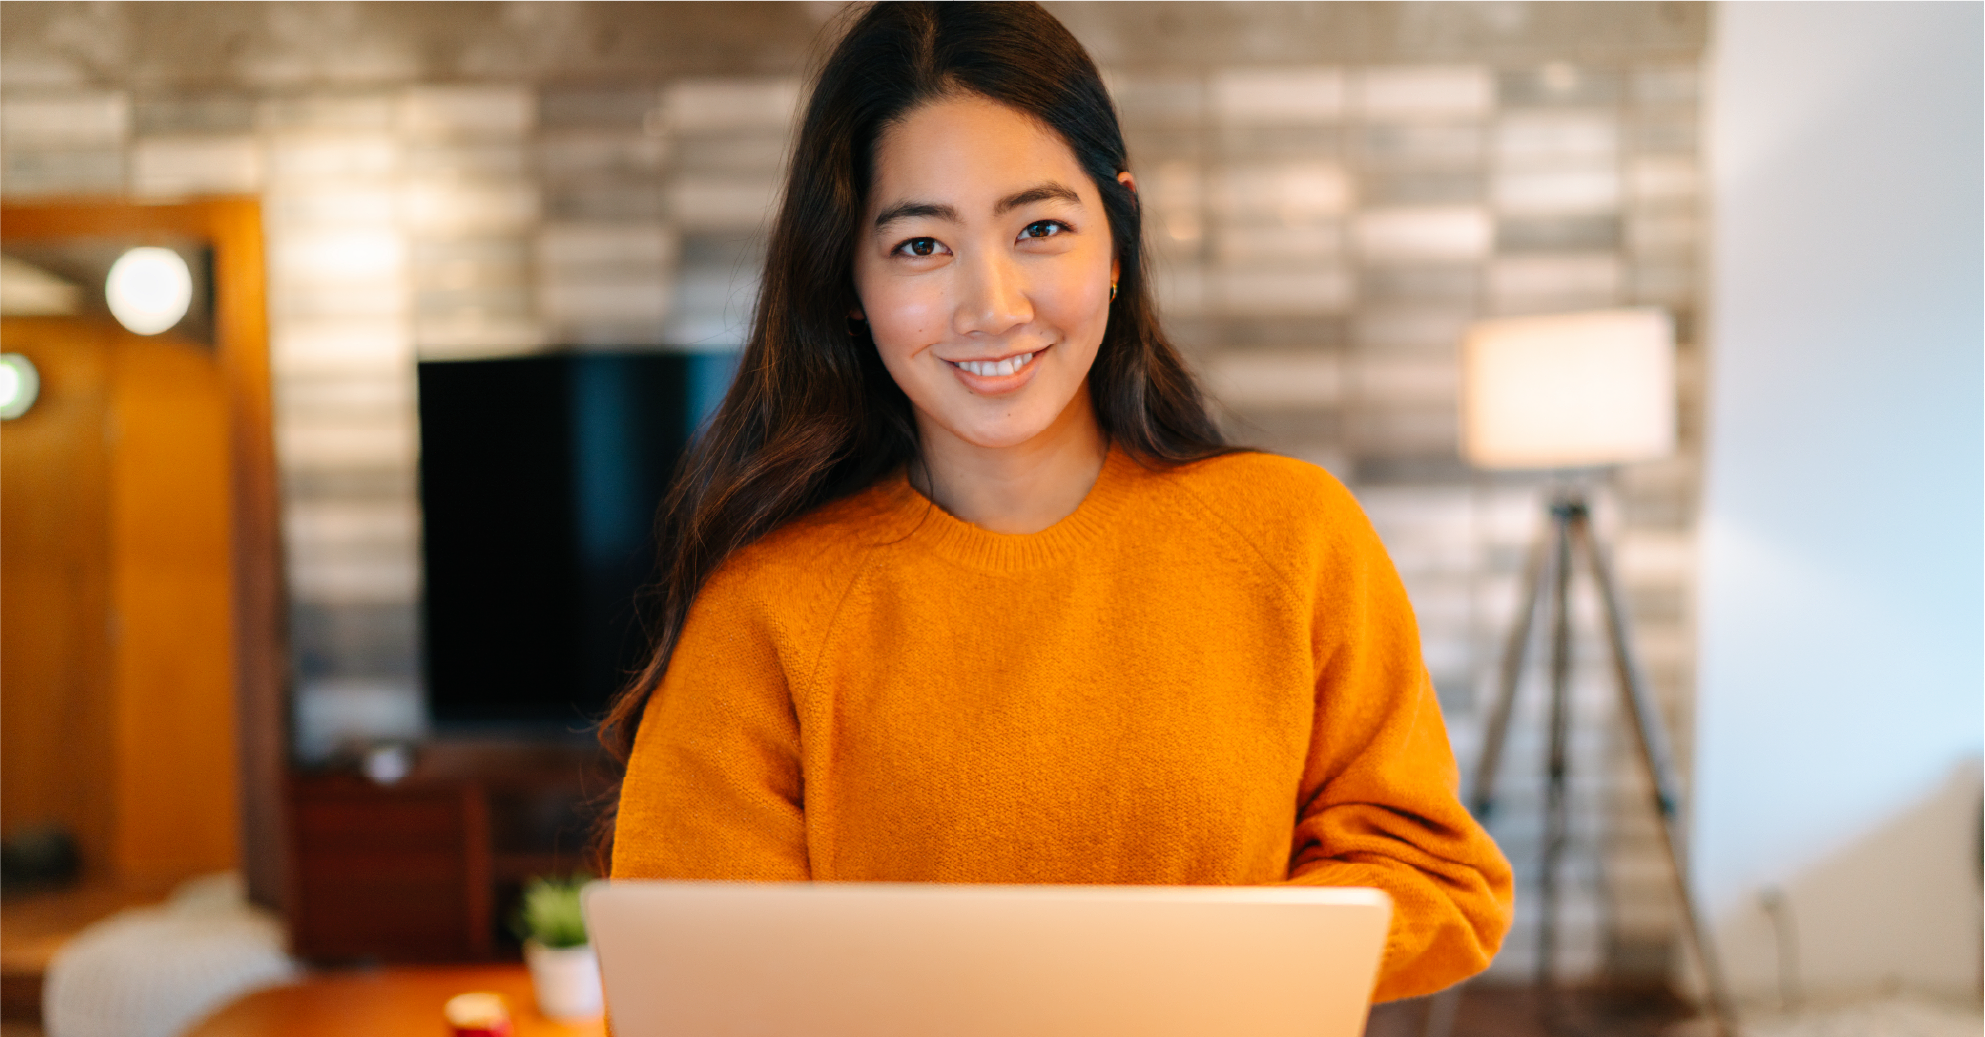 Smiling Lady in an orange knit jumper holding a laptop.